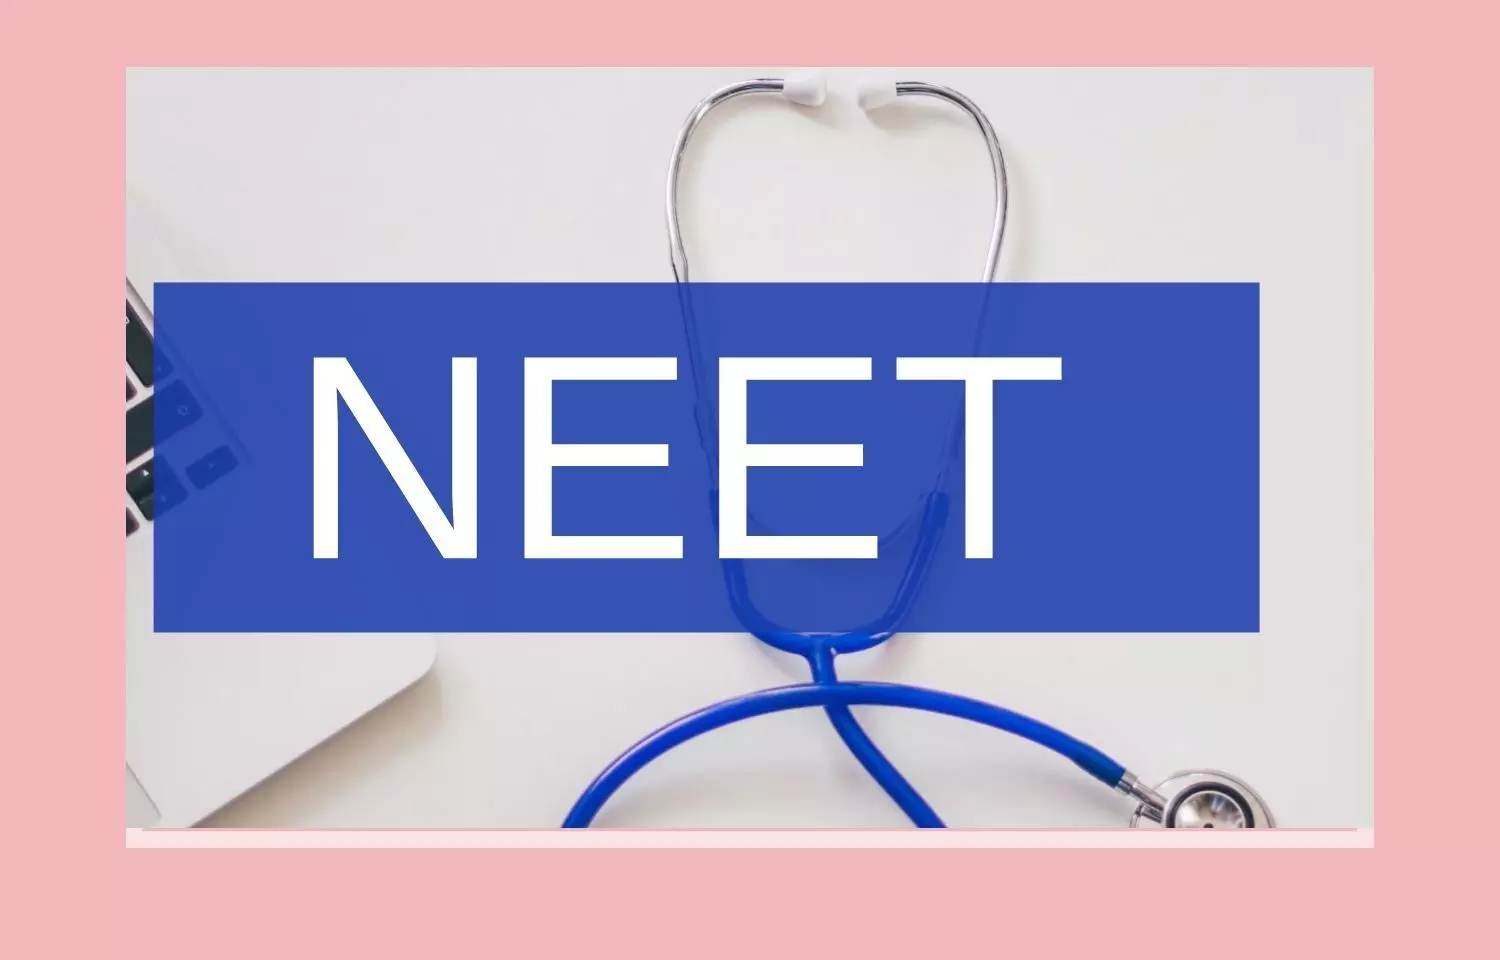 NEET Percentile reduced for BAMS, BUMS, BHMS, BSMS Admissions, AACCC extends round 3 counselling